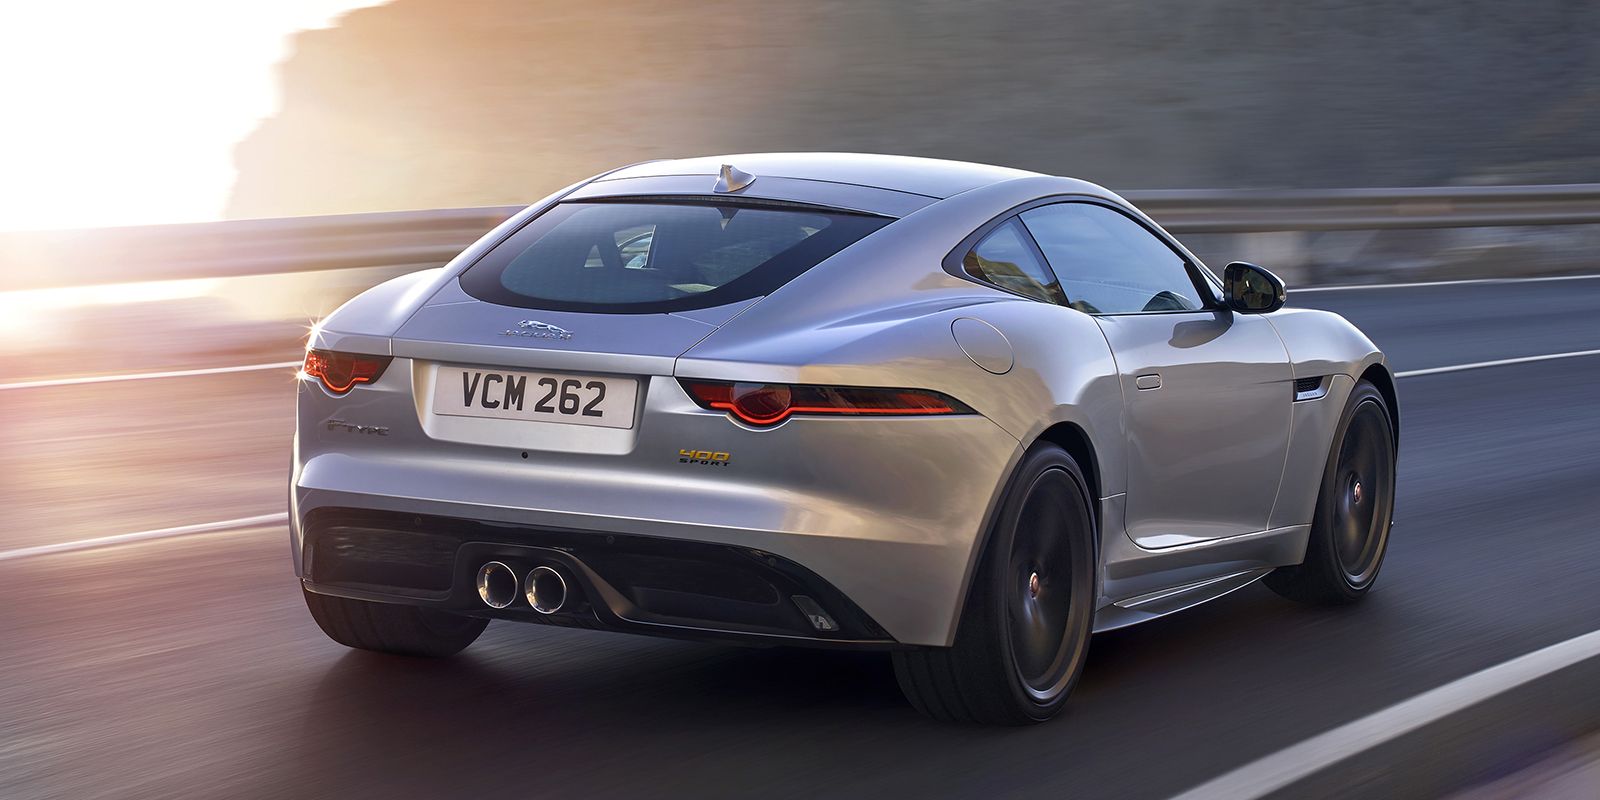 The 2018 Jaguar F-Type 400 Sport Gets 400-HP and a Nifty GoPro App